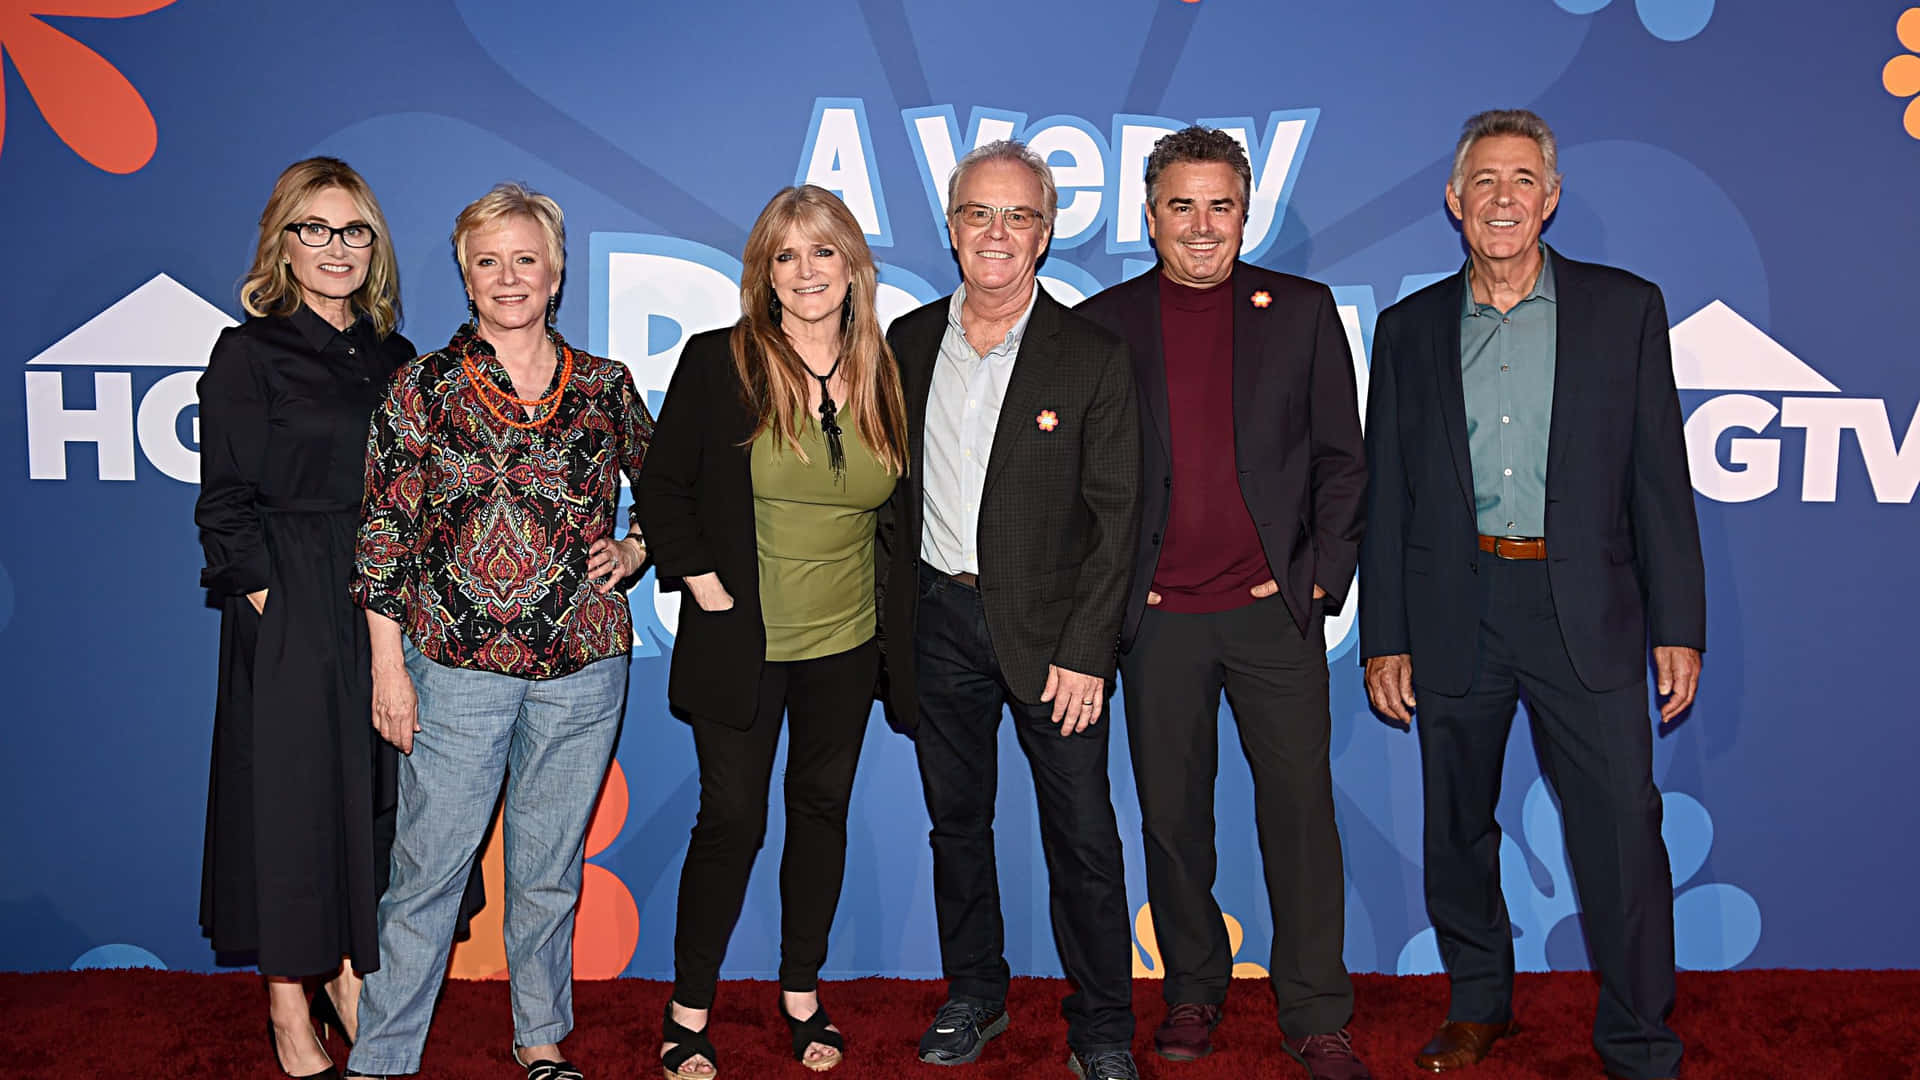 A Group Of People Standing On A Red Carpet Wallpaper